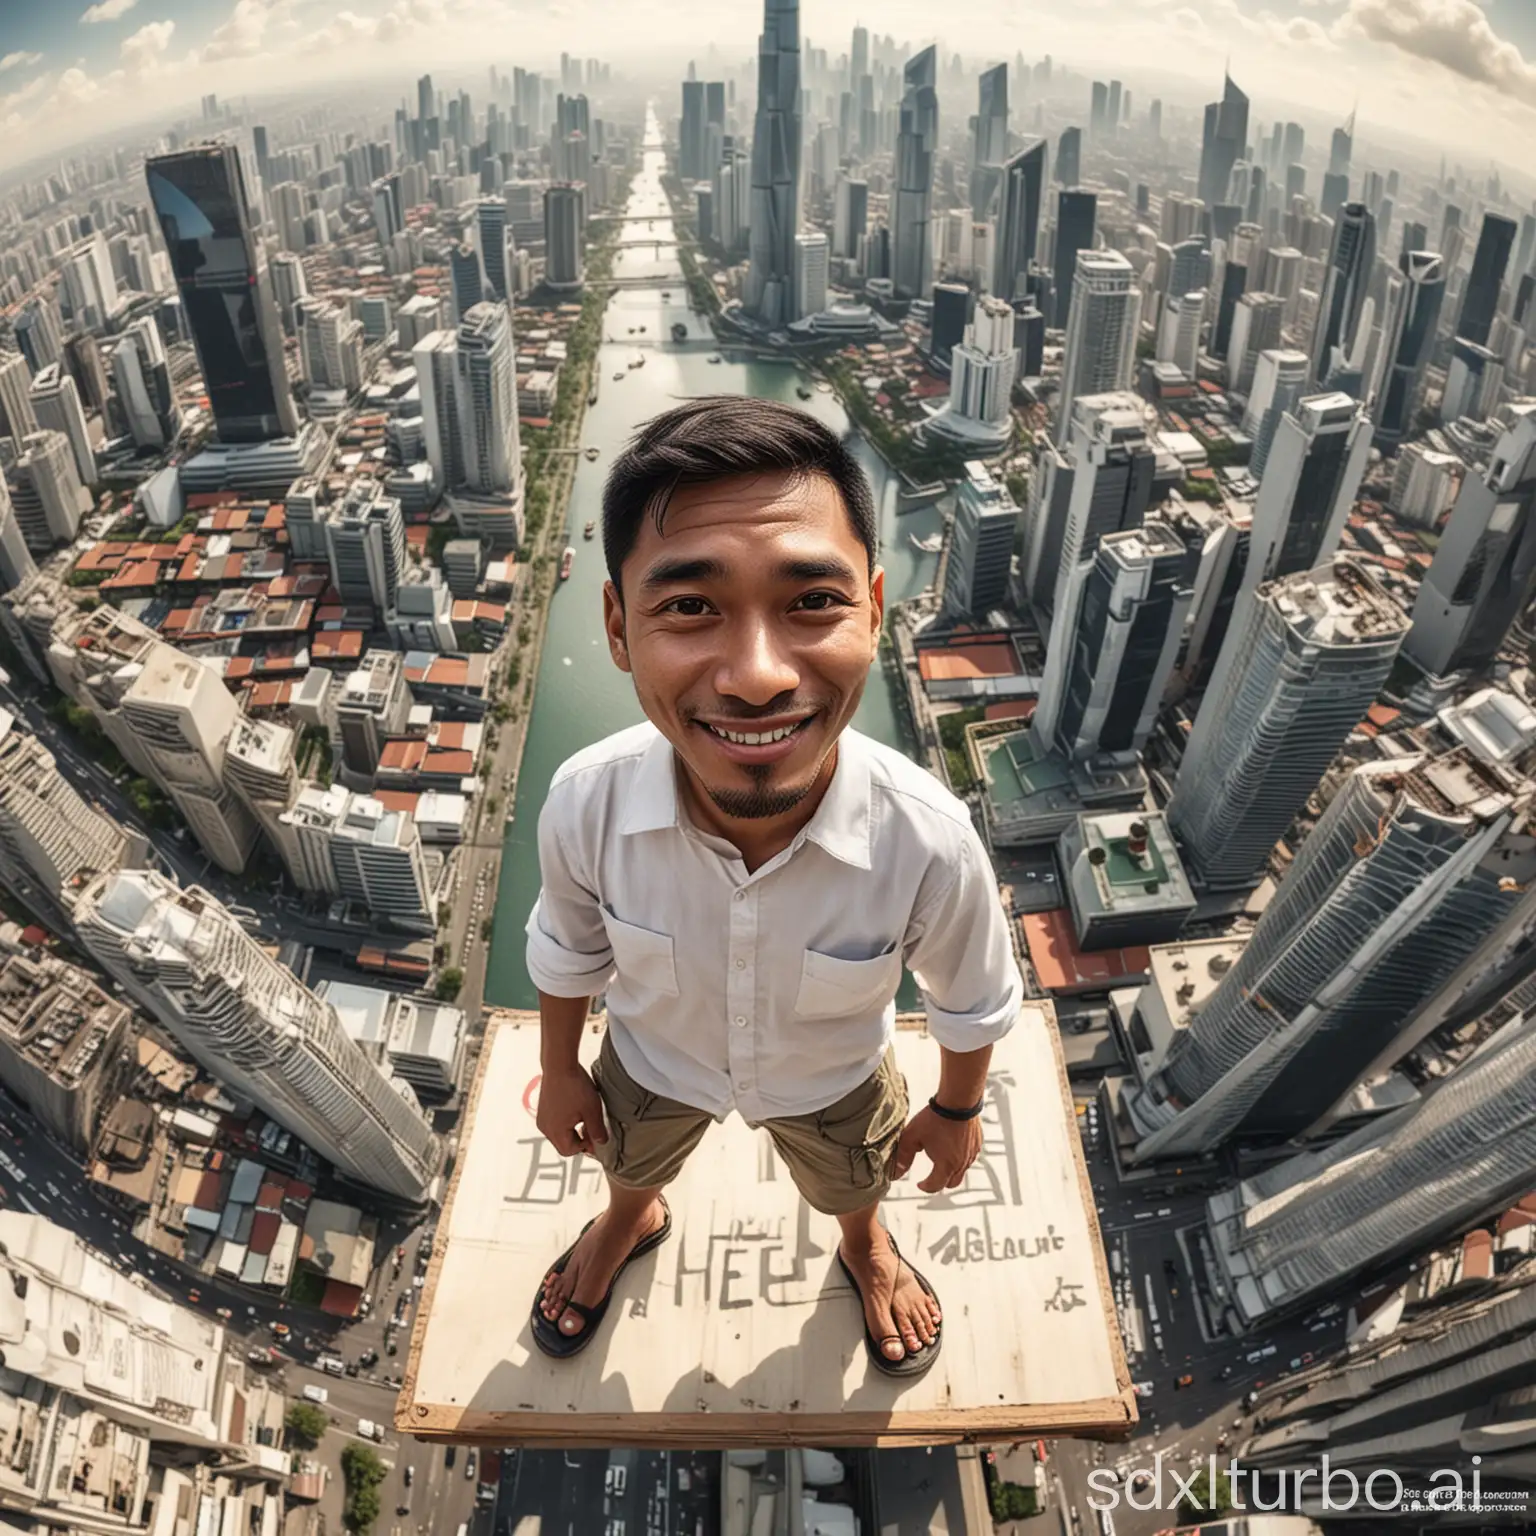 Create a caricature 4D hyperrealistic of an Indonesian man aged 35yo, clean face, wearing white clothes, cargo pants, flip-flops, standing at the top of the tallest building while holding the camera man's hand. Next to it there is a board with the text 'PLEASE HELP'. Beautiful city background, shot from above, fish eye lens